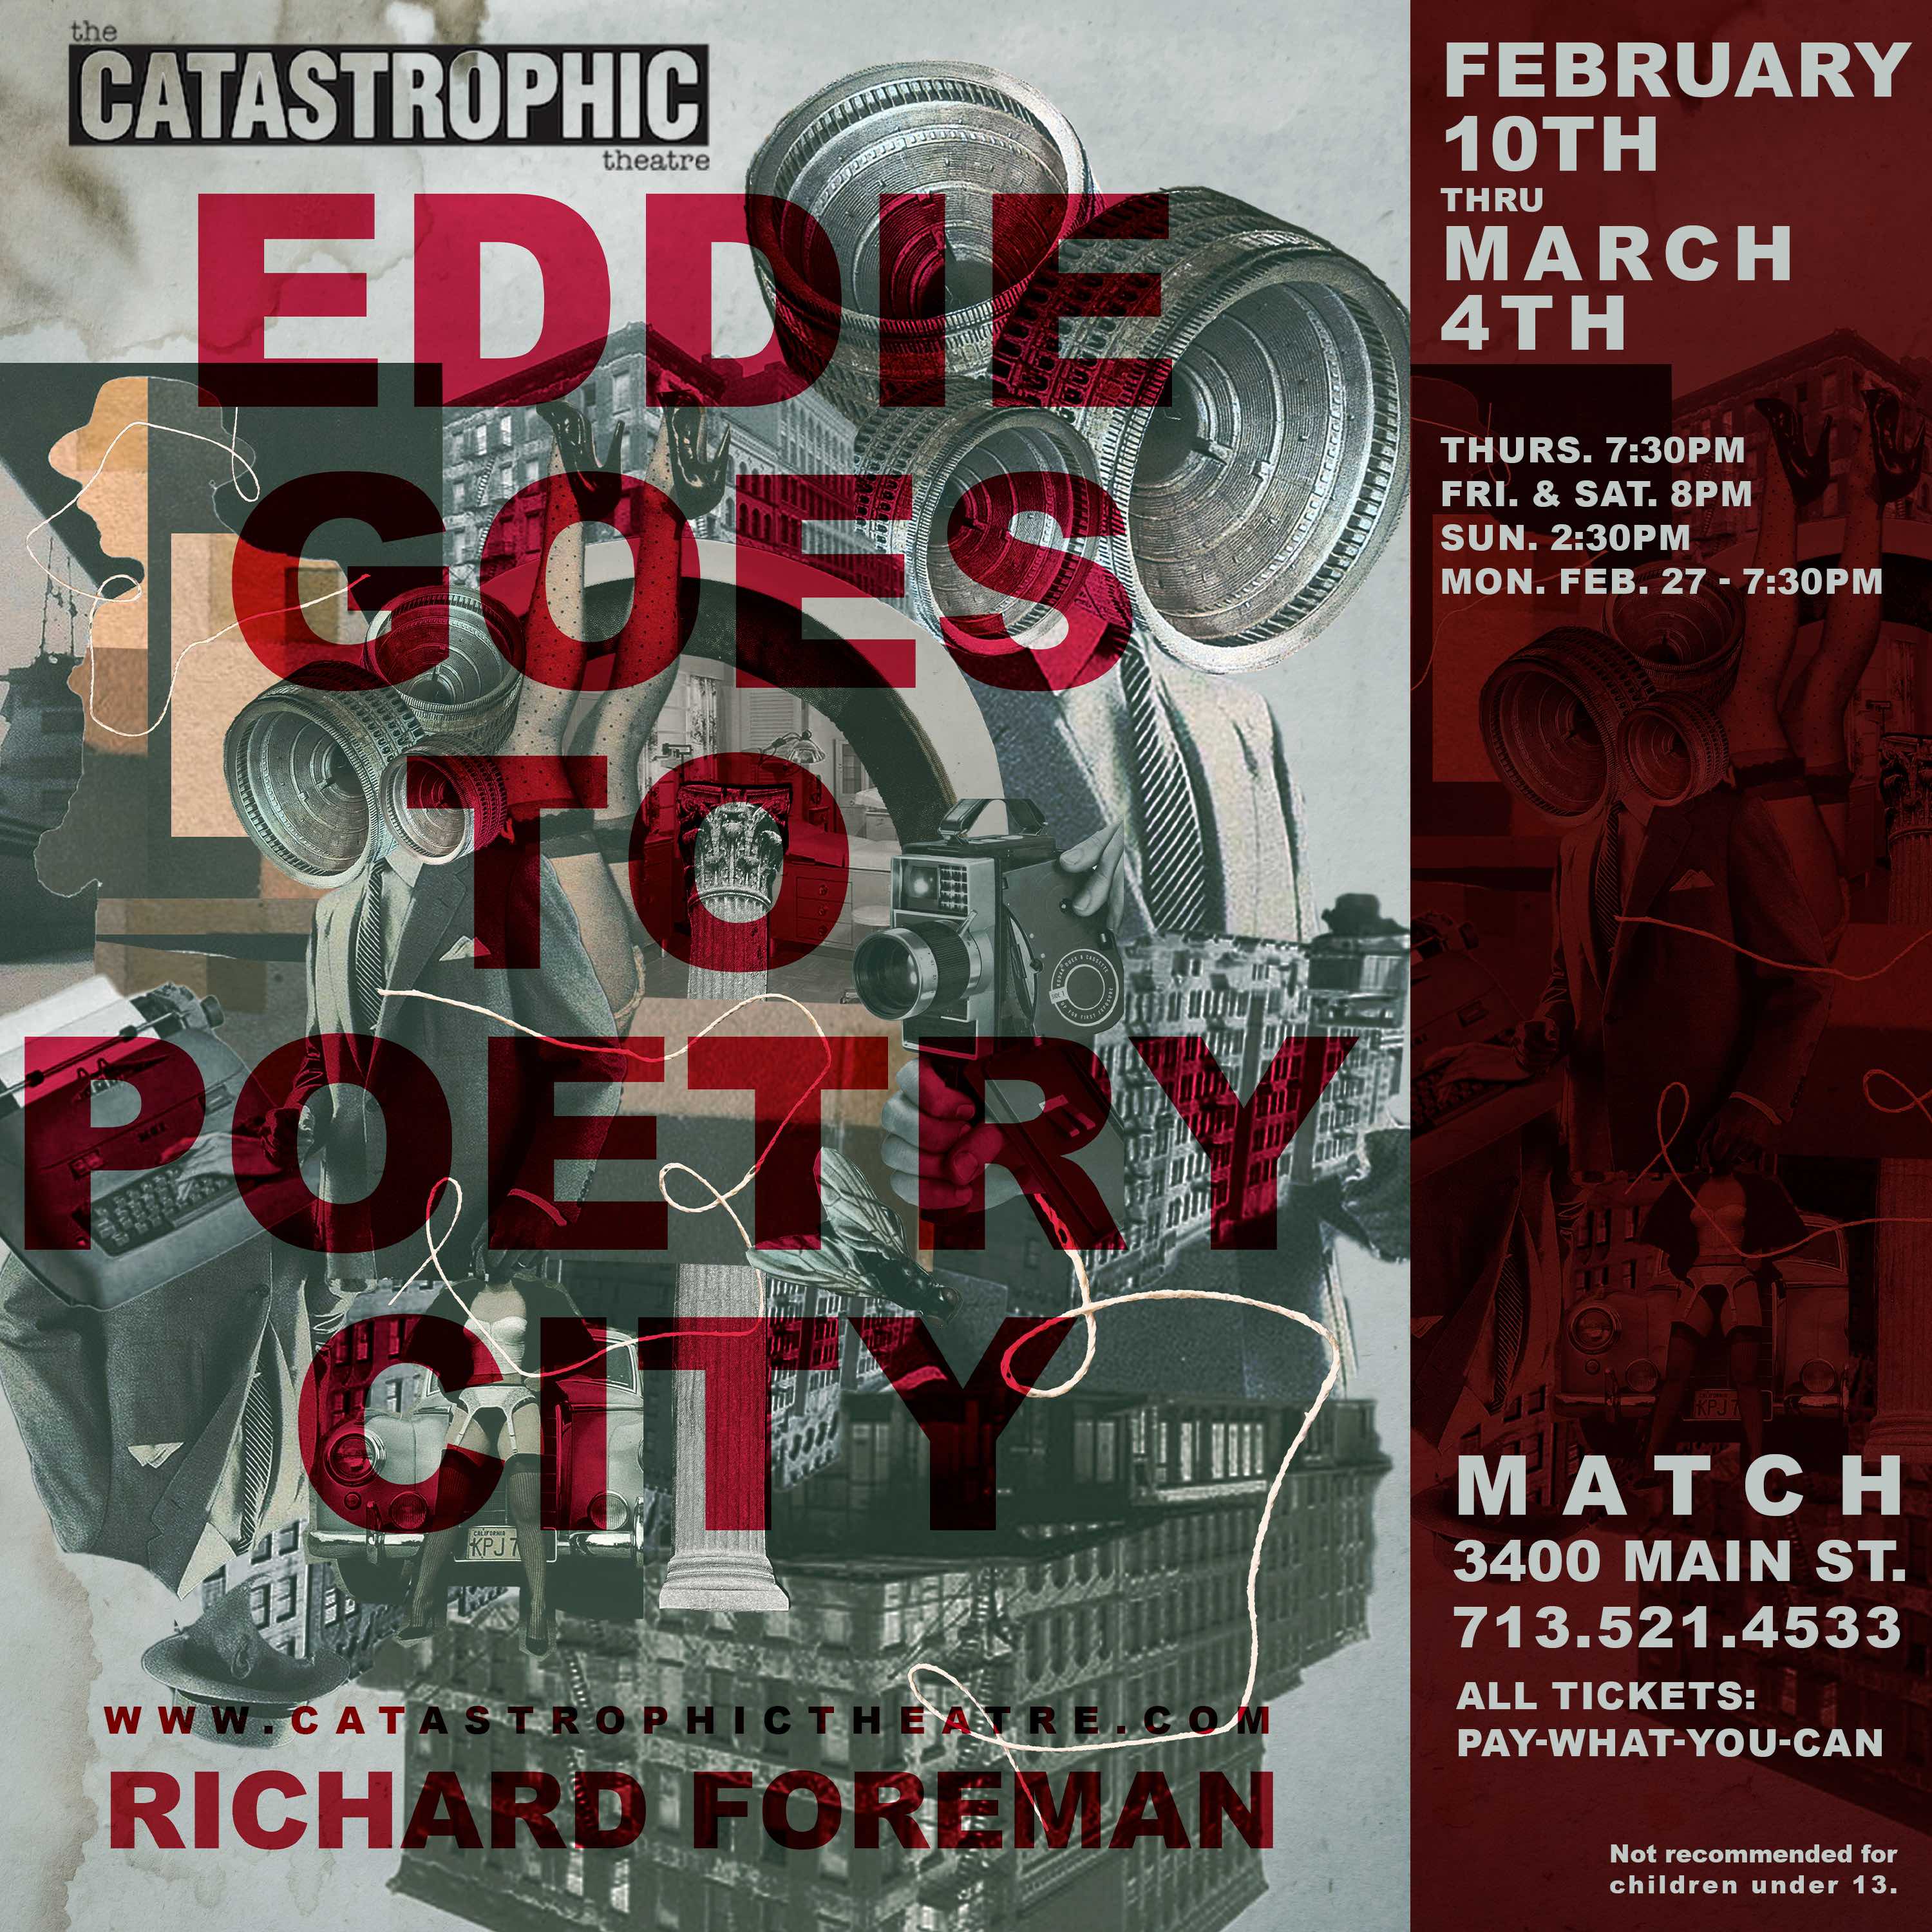 The Catastrophic Theatre Presents EDDIE GOES TO POETRY CITY By Richard Foreman 